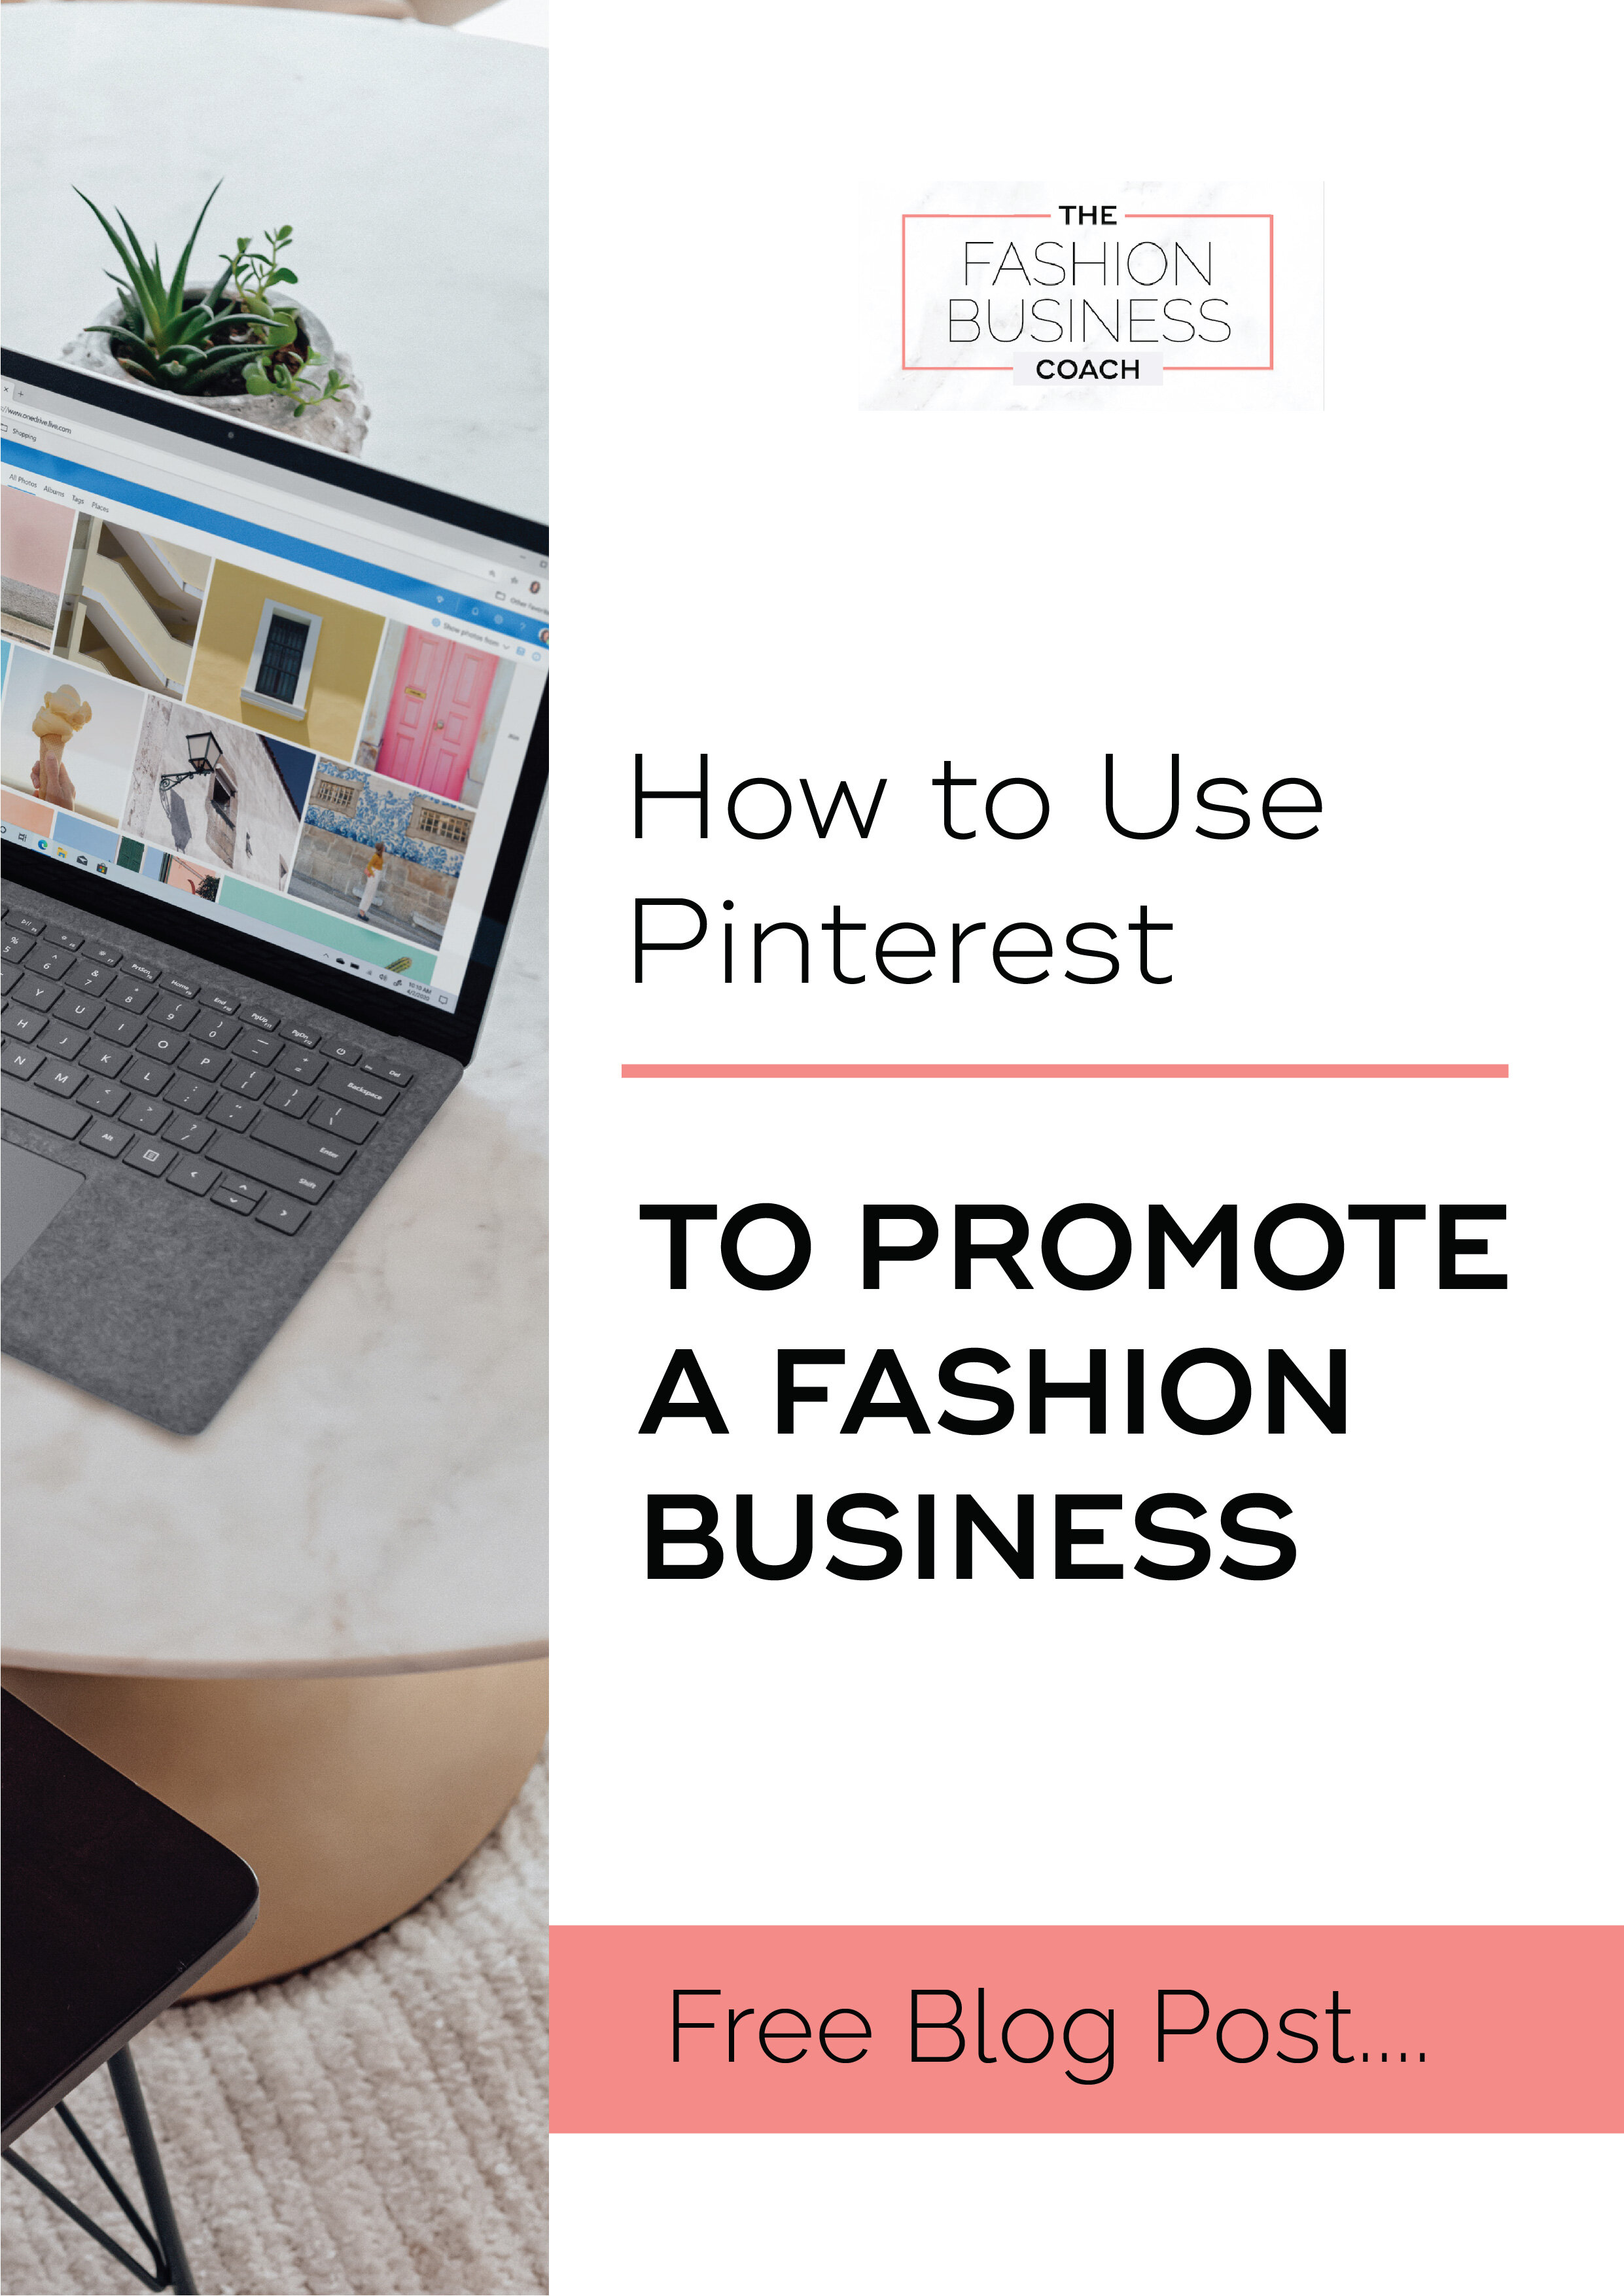 How to use Pinterest to Promote a Fashion Business1.jpg